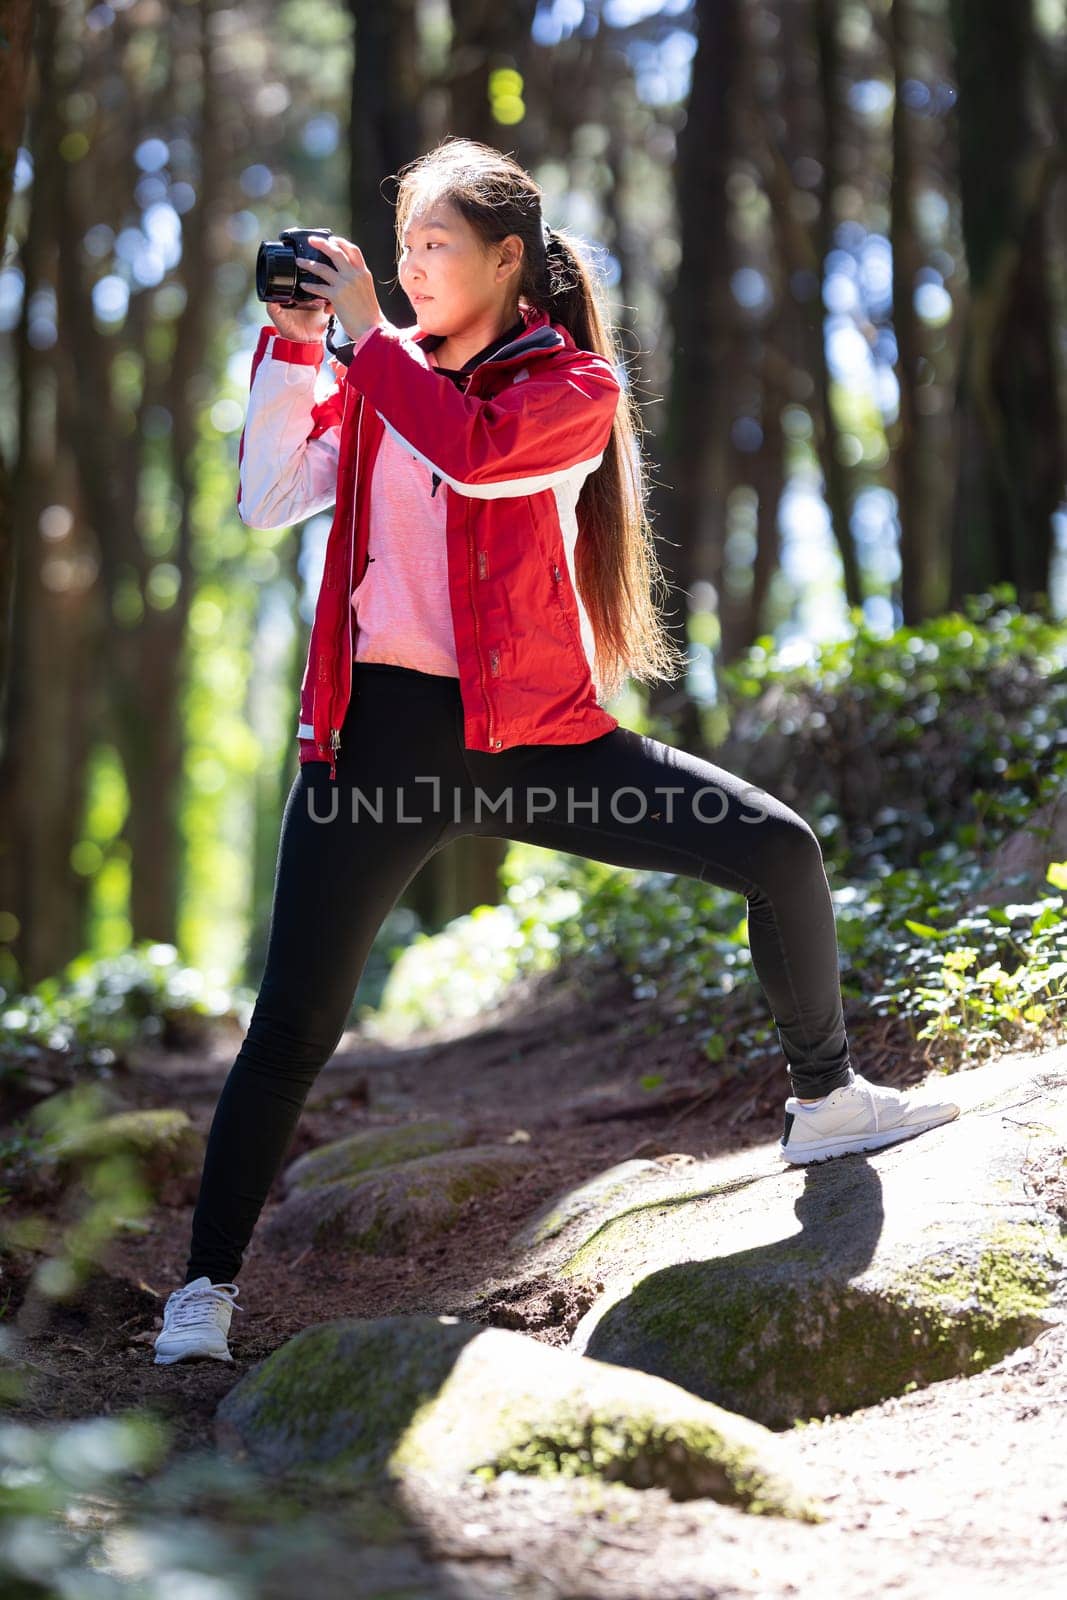 Woman photographer in Red Jacket Doing Yoga Pose by Studia72